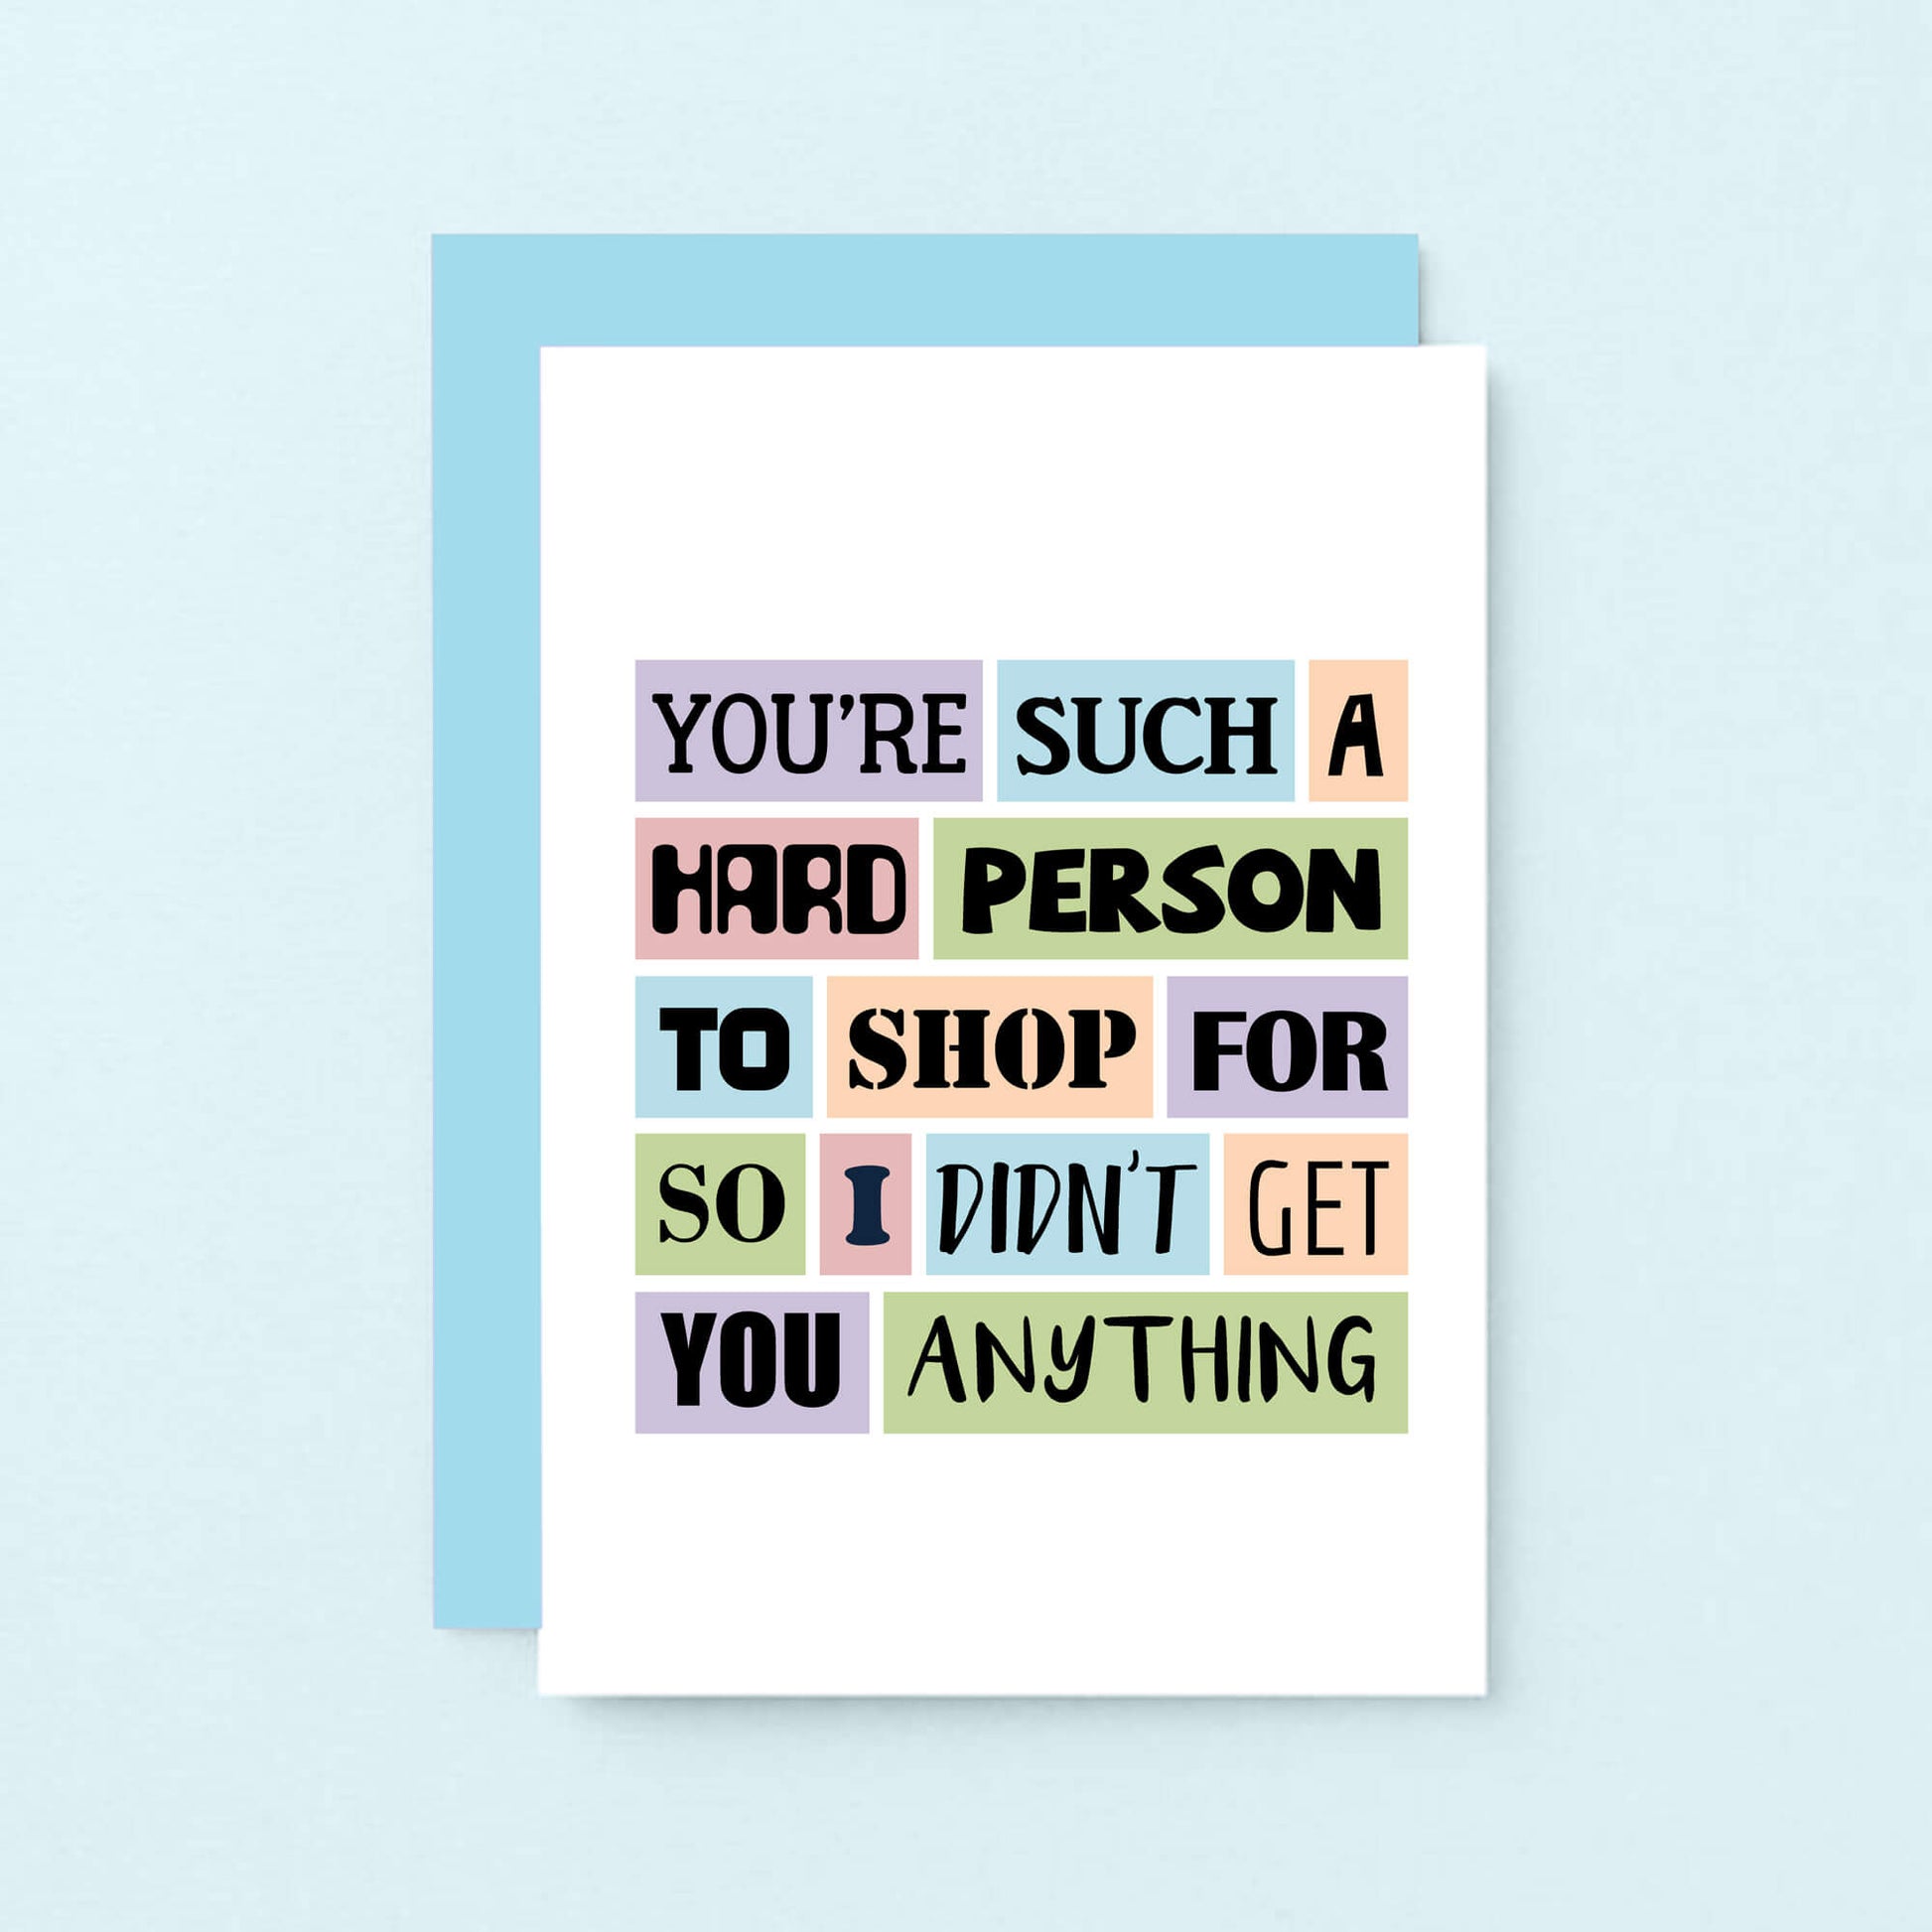 Funny Birthday Card by SixElevenCreations. Reads You're such a hard person to shop for so I didn't get you anything. Product Code SE0026A6